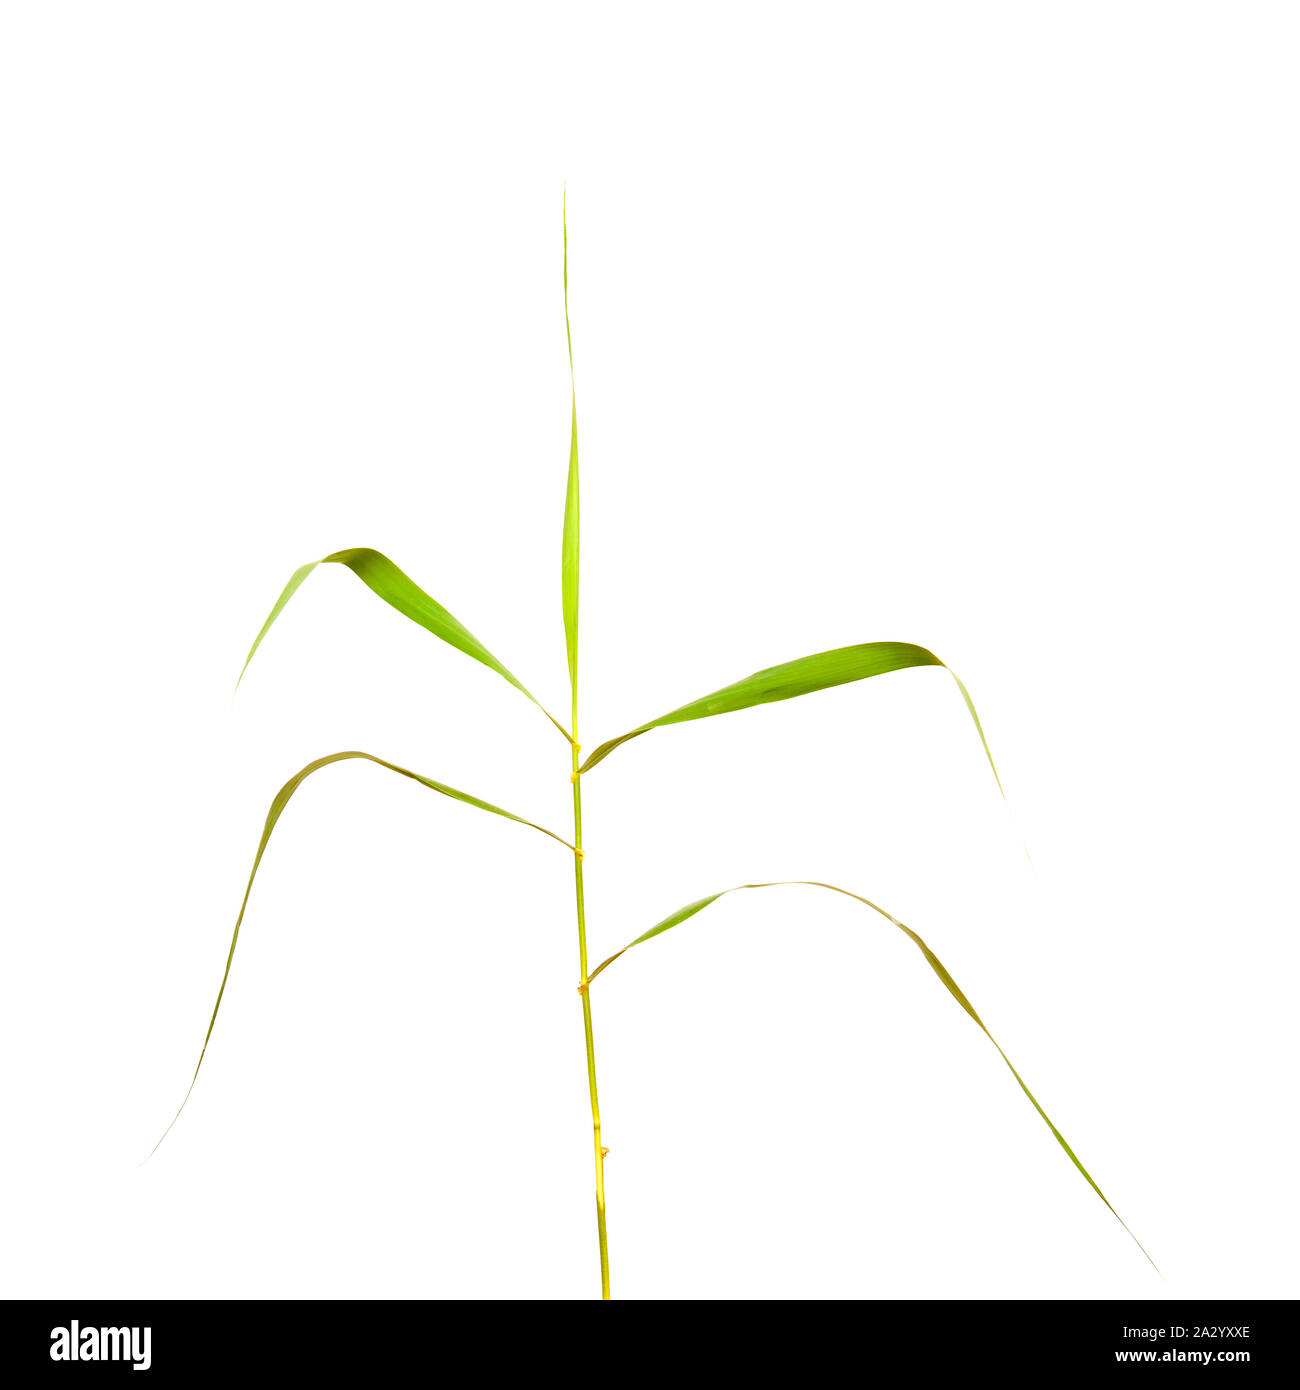 Flora of Gran Canaria - Arundo donax, giant reed isolated on white background Stock Photo